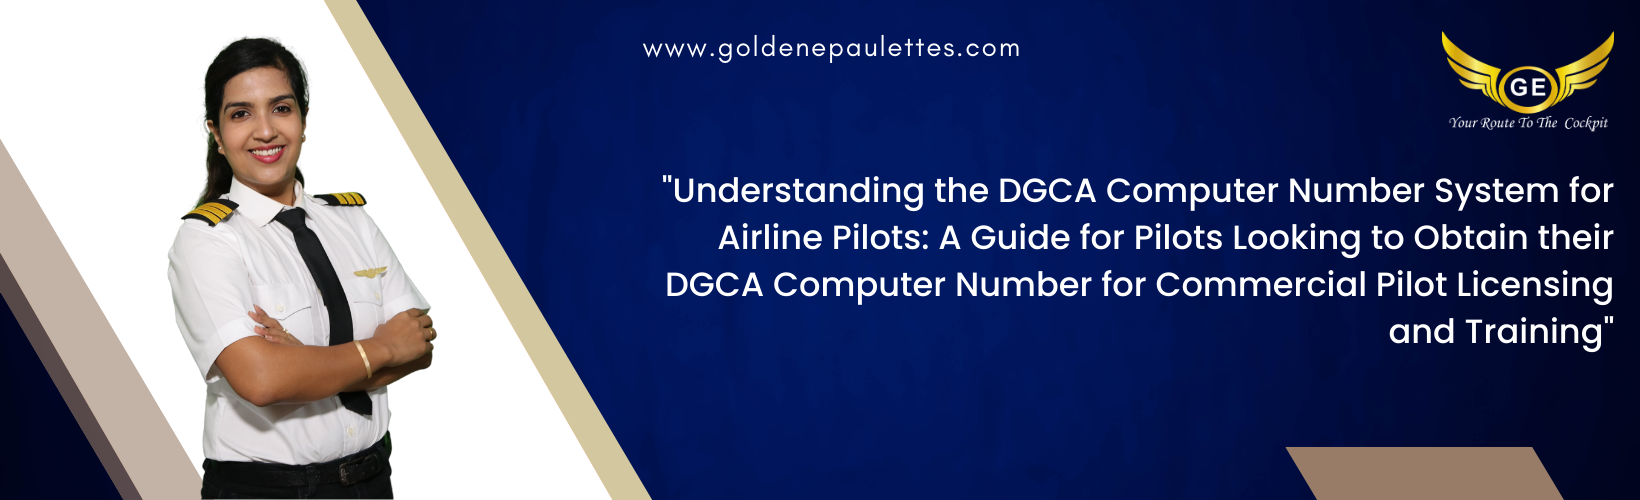 Understanding the DGCA Computer Number System for Airline Pilots